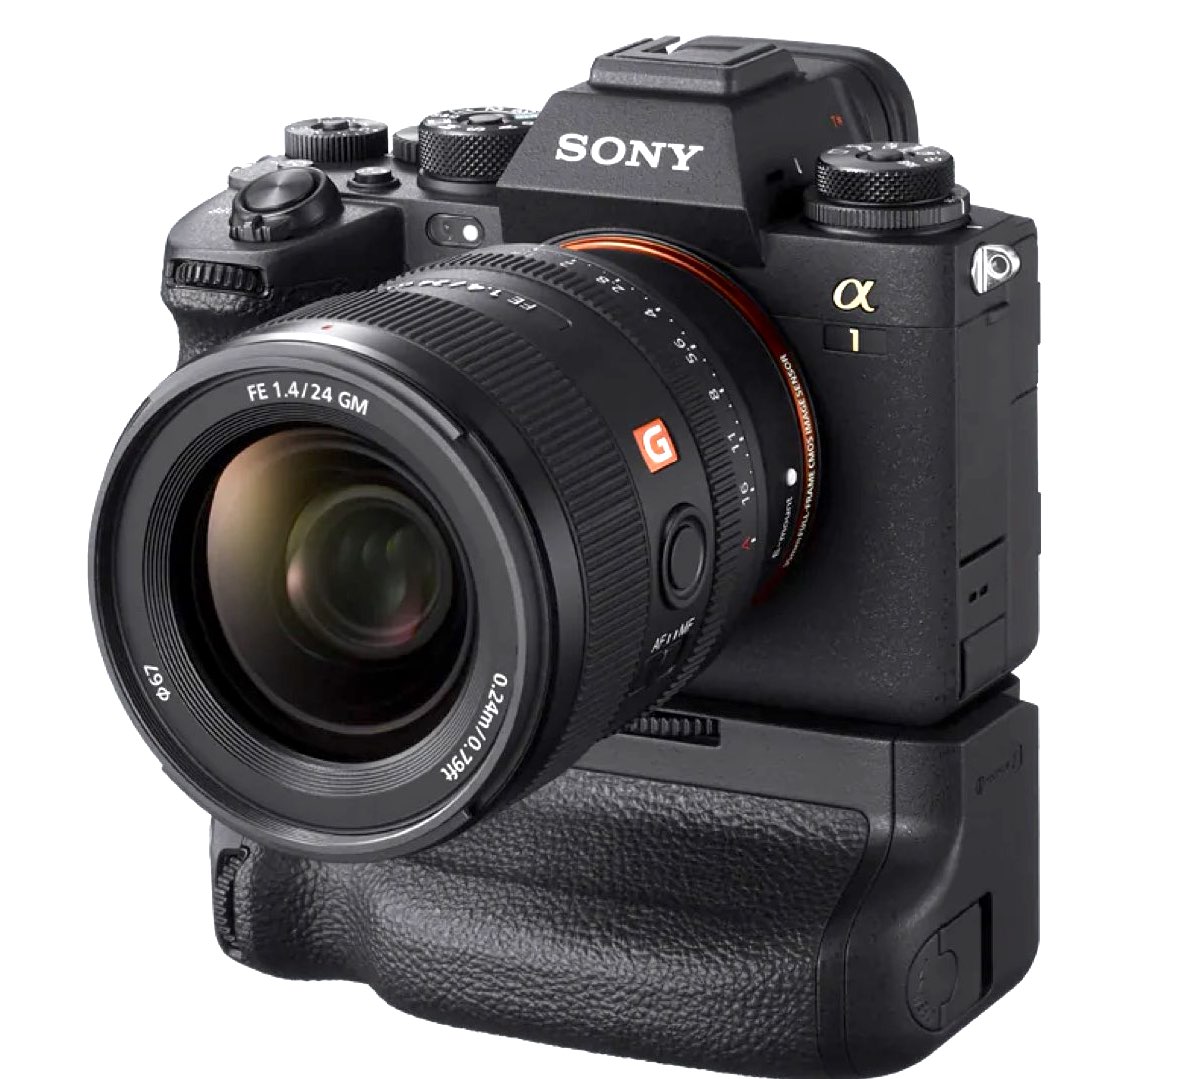 New 50MP, 30 fps, 8K30p, 6,500 Sony A1 mirrorless camera (ILCE1